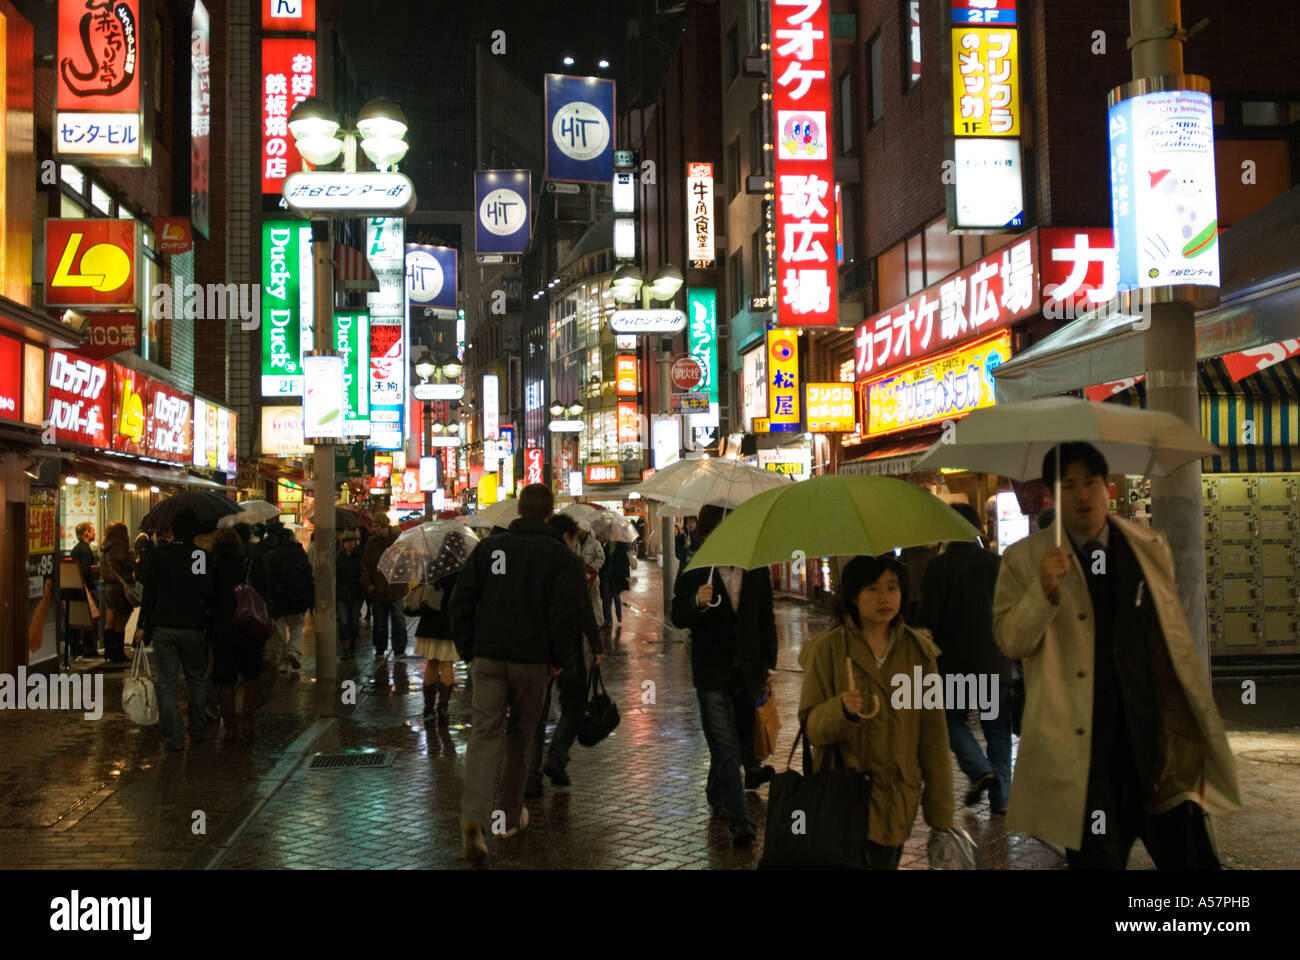 Busy street at night in Shibuya entertainment and shopping district Tokyo Japan 2006 Stock Photo